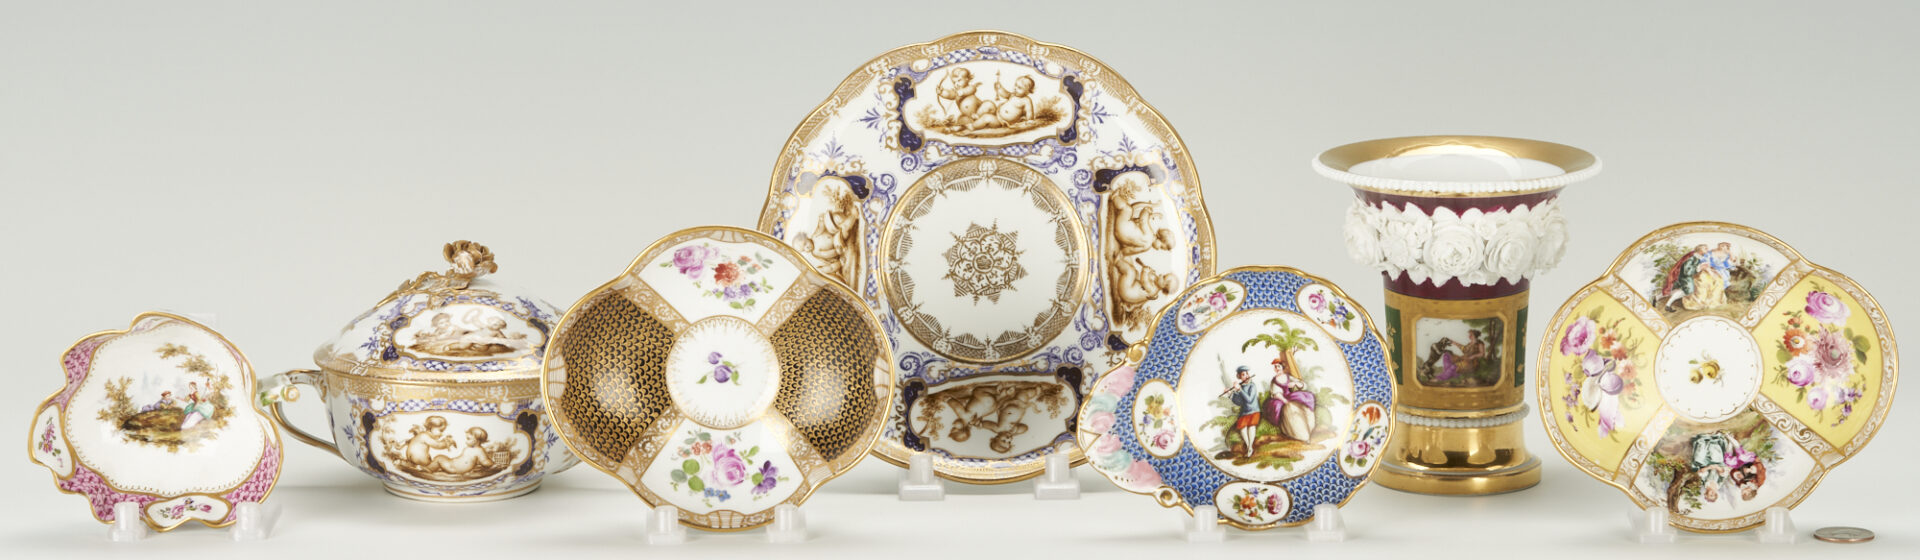 Lot 861: 7 pcs Continental Porcelain, mostly Manner of Helena Wolfsohn